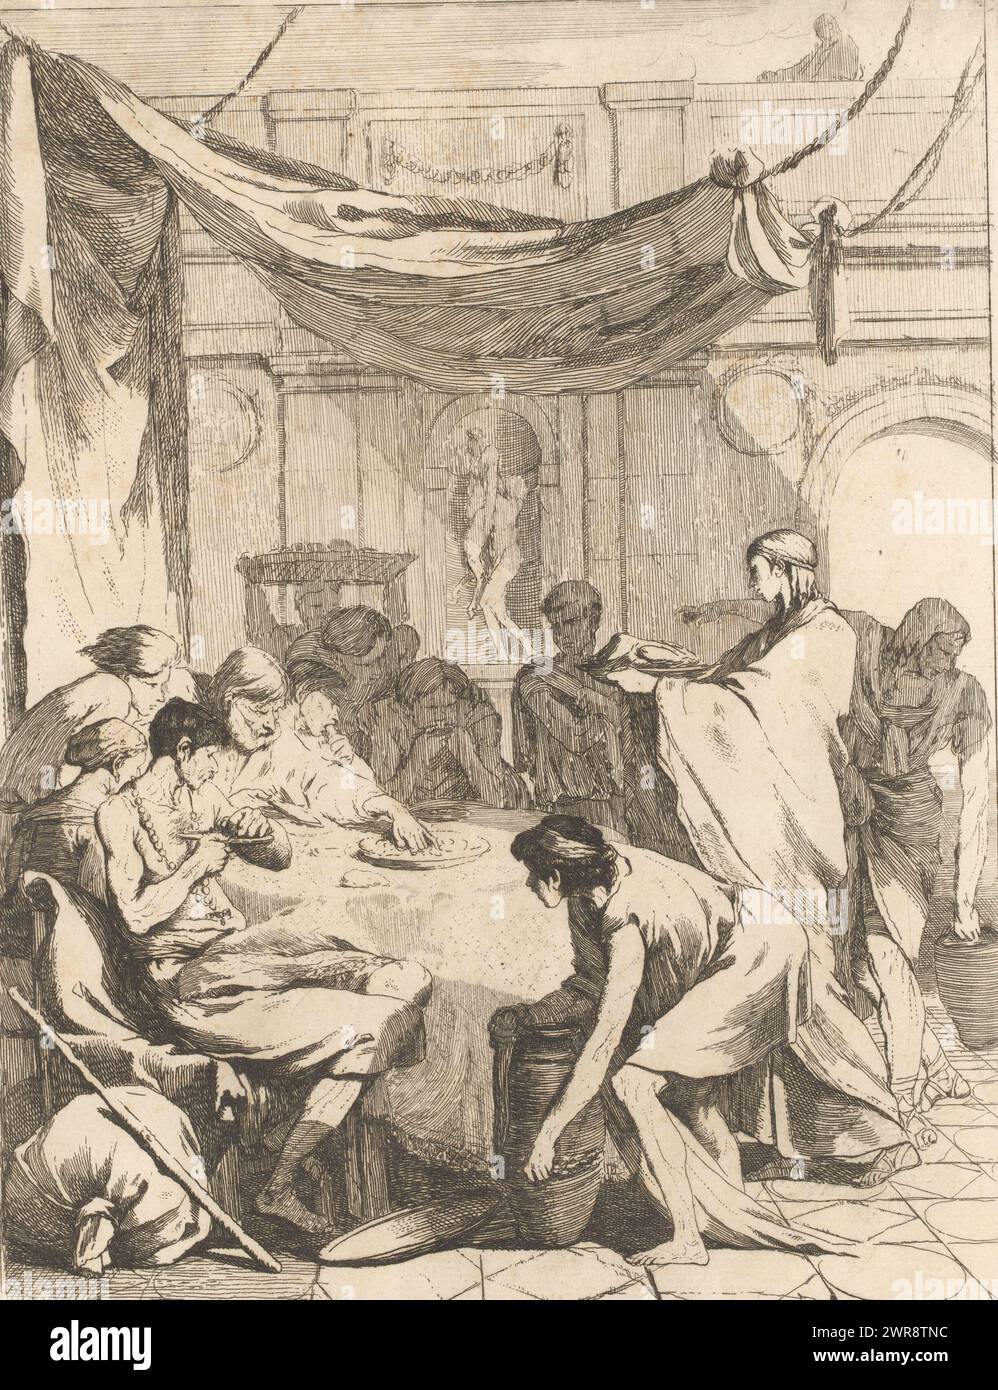 Feeding the Hungry, The Seven Works of Mercy (series title), Part of a series of seven works of mercy with scenes in an ancient setting., print maker: François Hutin, after own design by: François Hutin, Dresden, c. 1730 - c. 1750, paper, etching, height 233 mm × width 164 mm, print Stock Photo